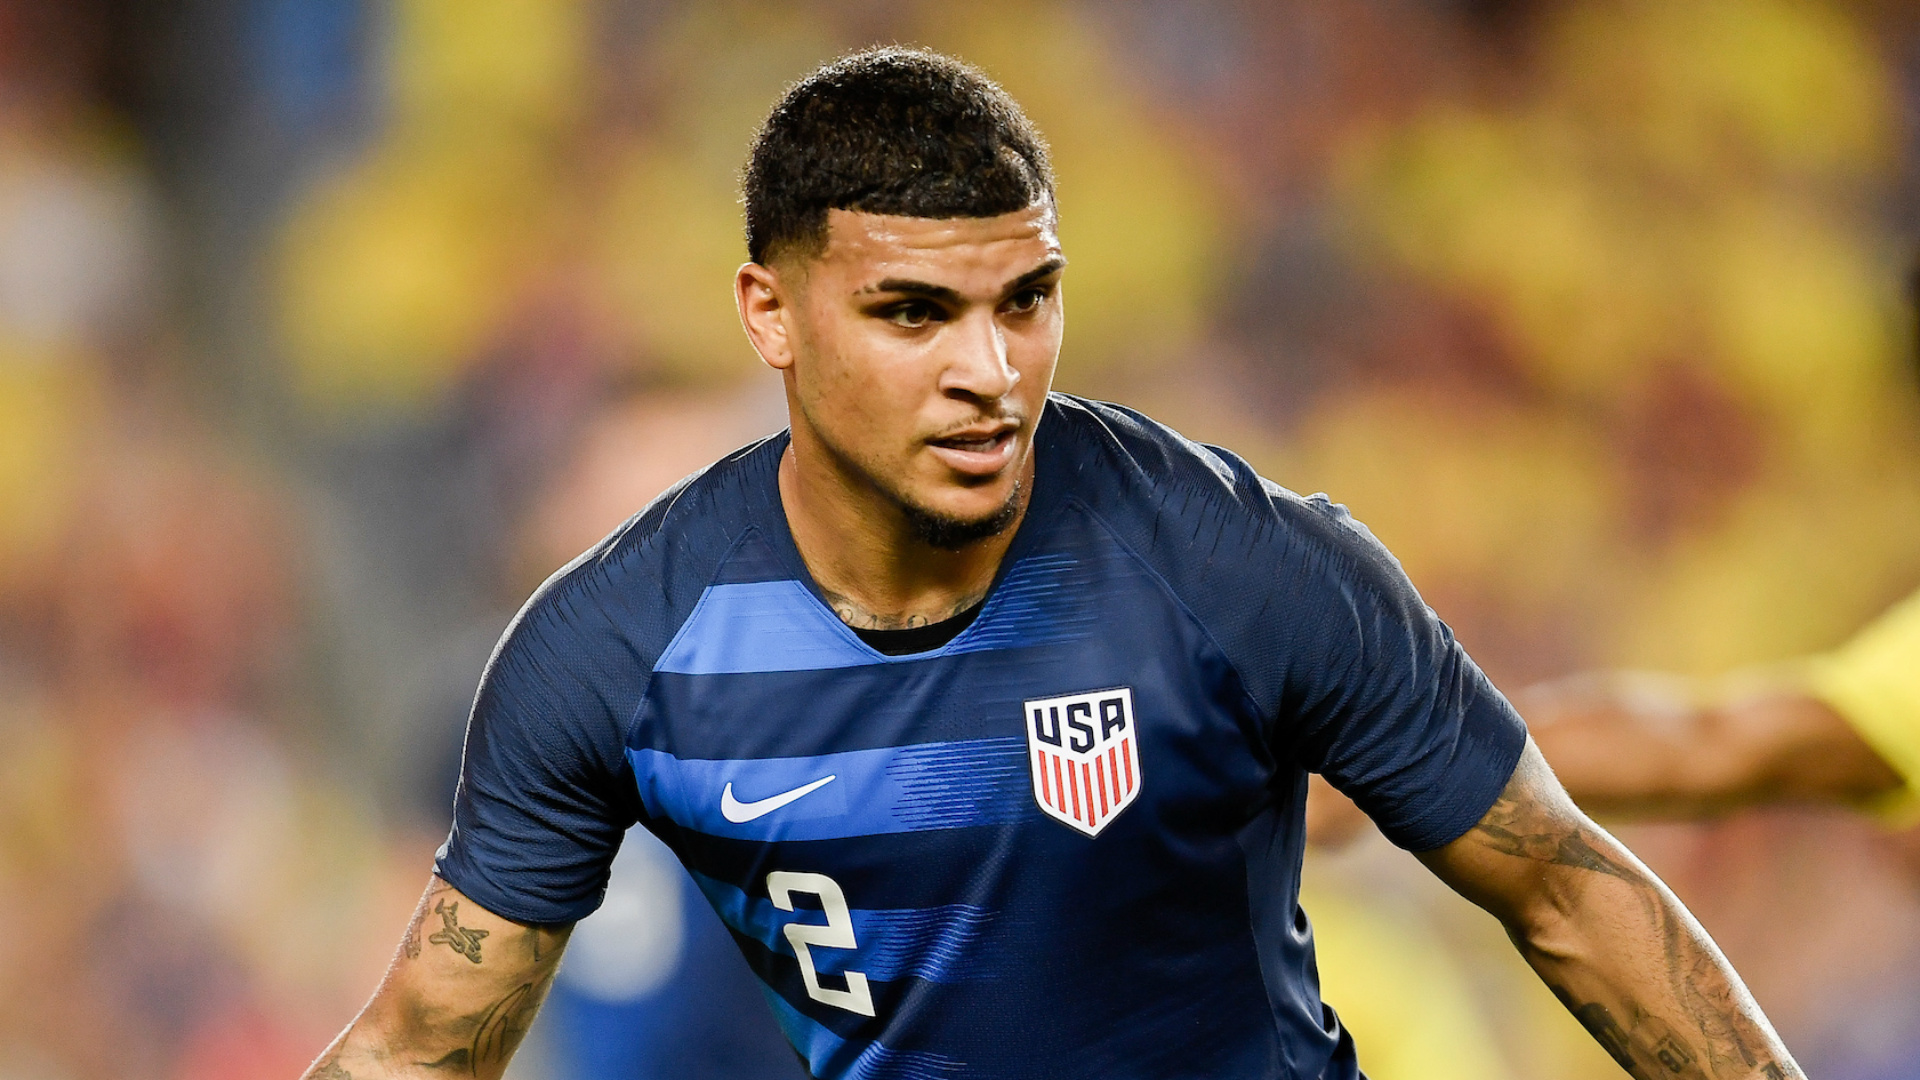 'It’s kind of a sh*t show right now' - USMNT star Yedlin hopes protests can change 'embarrassing' United States